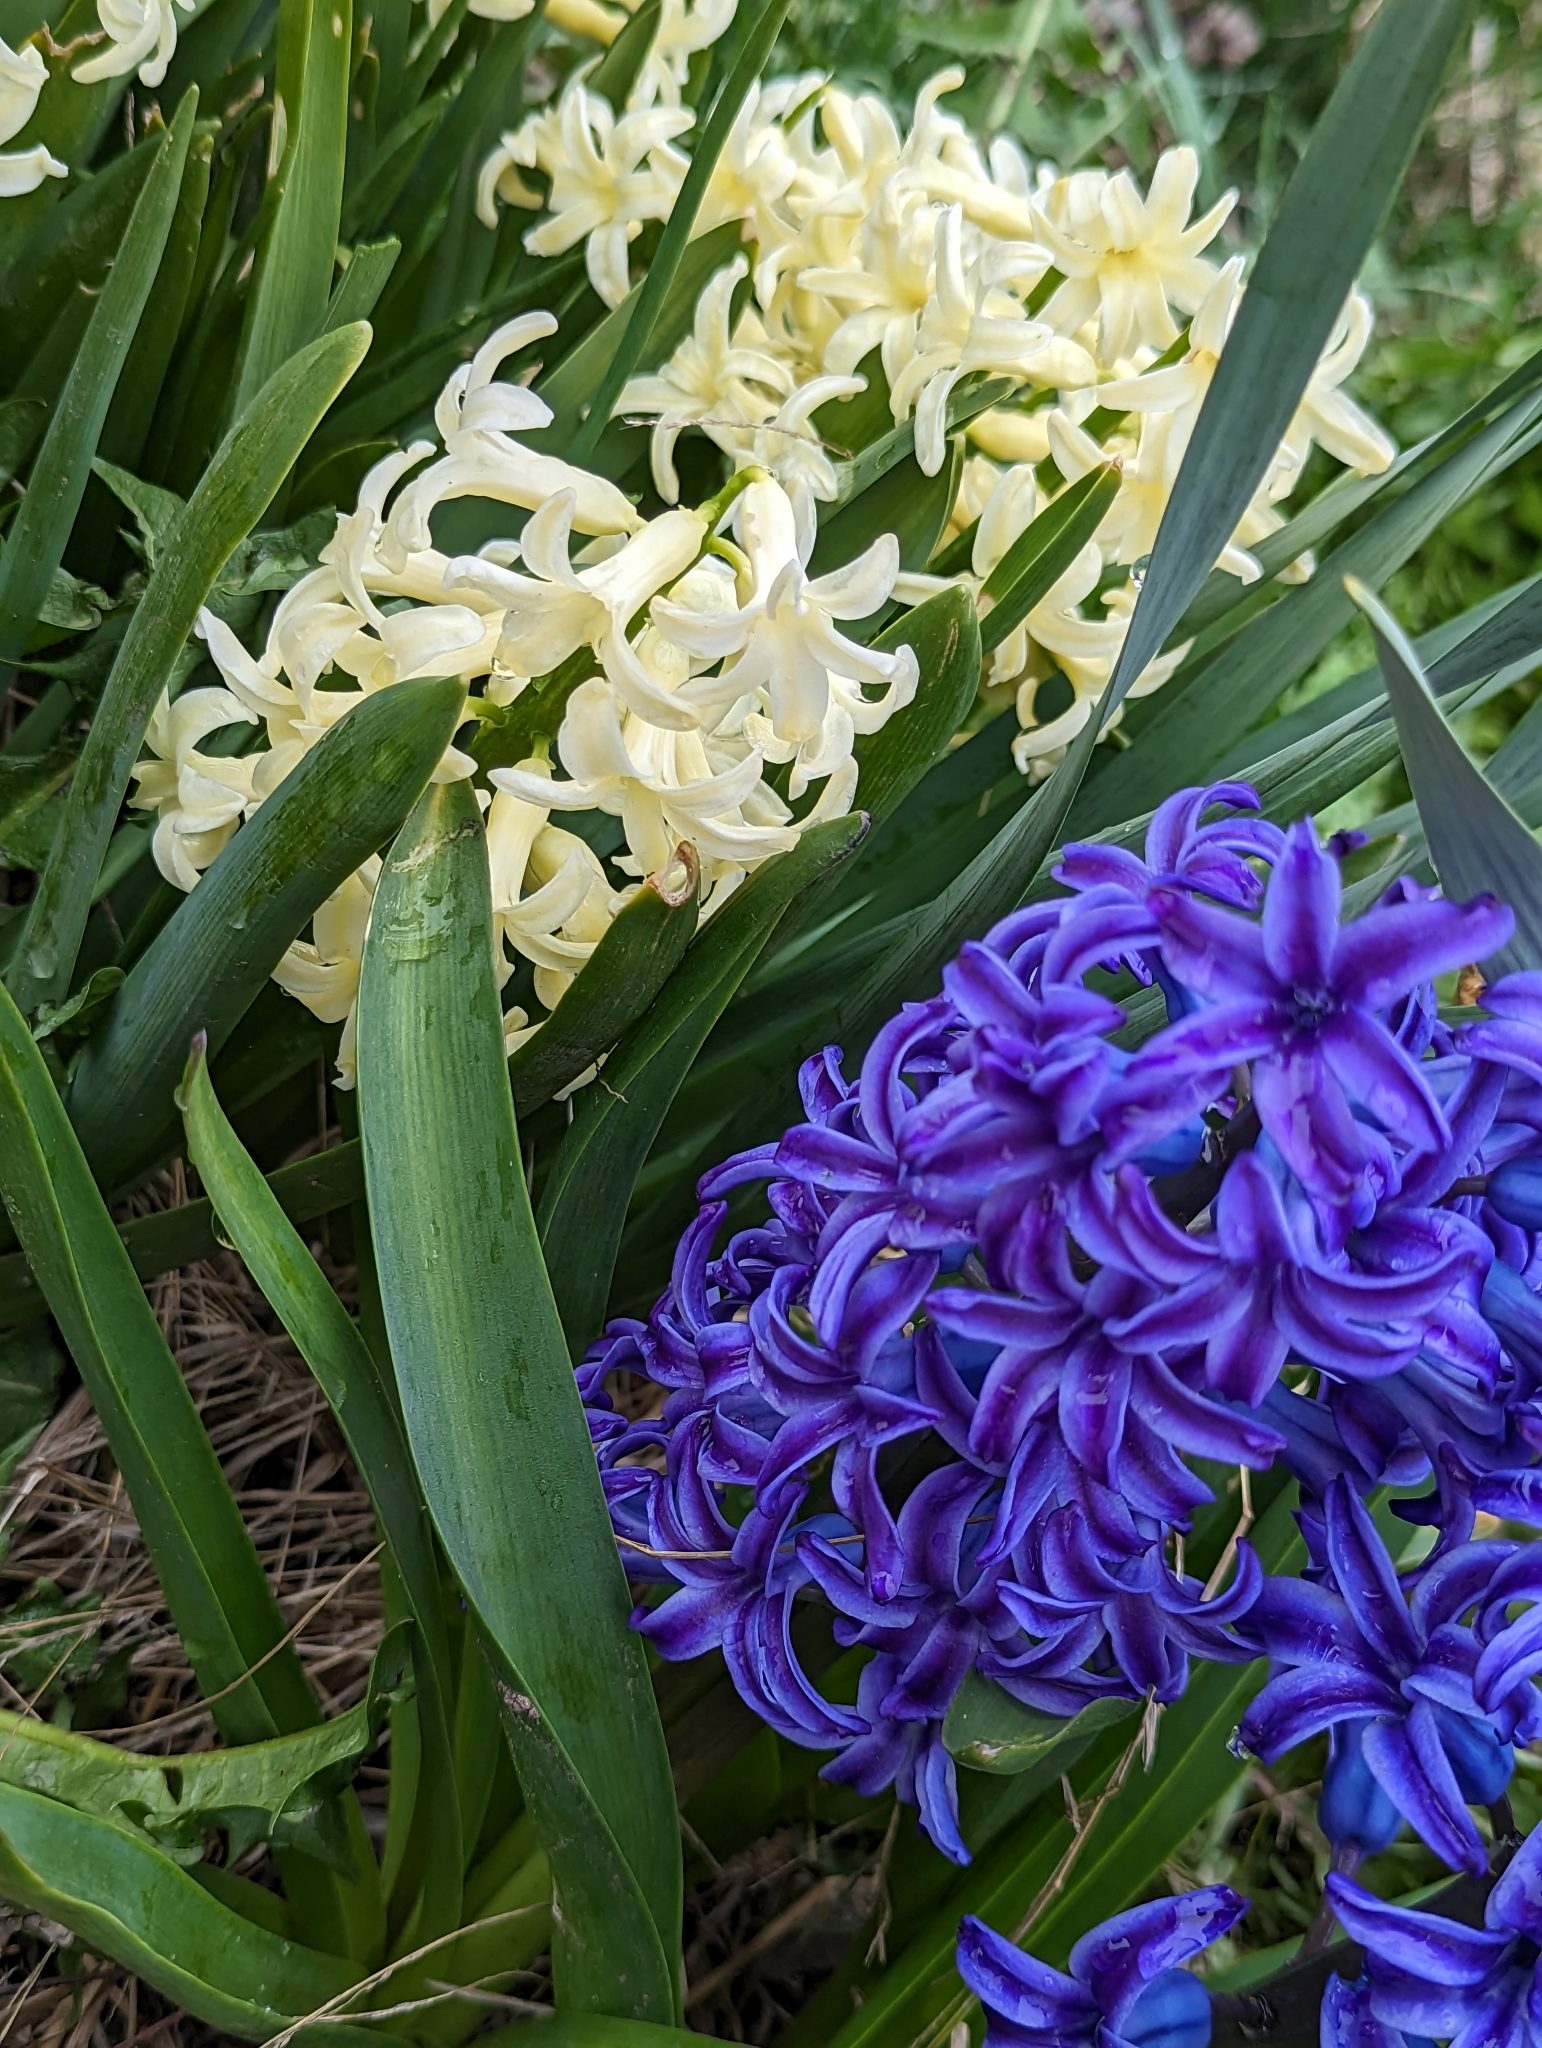 Blue and white hyacinth flowered. Camera nestled down into the leaves so the view is quite close.